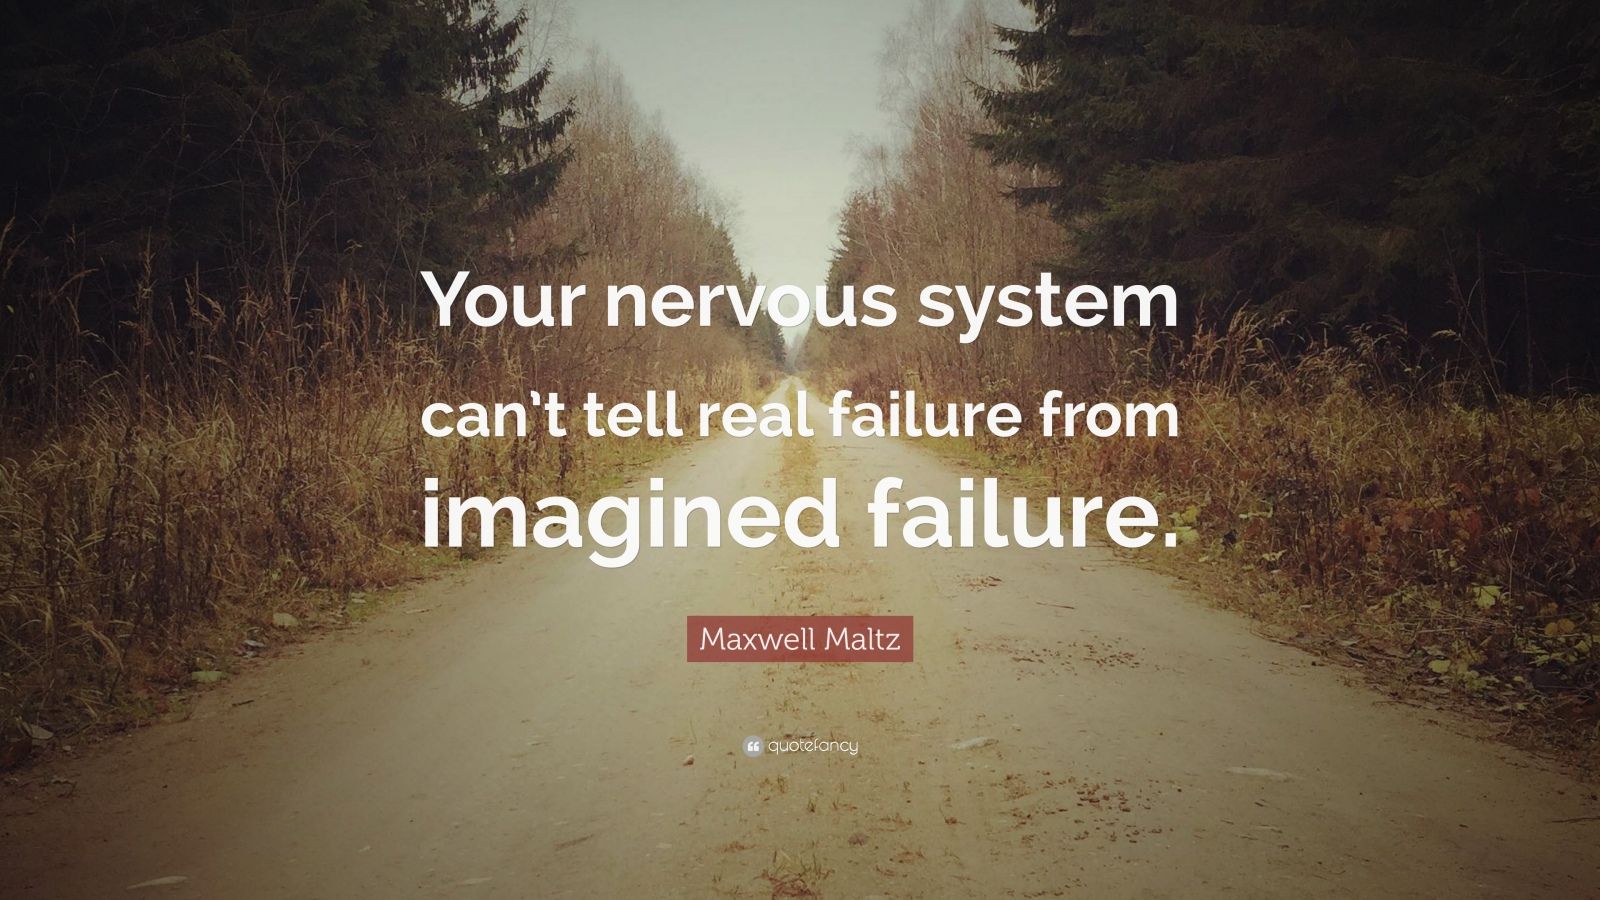 Maxwell Maltz Quote “Your nervous system can’t tell real